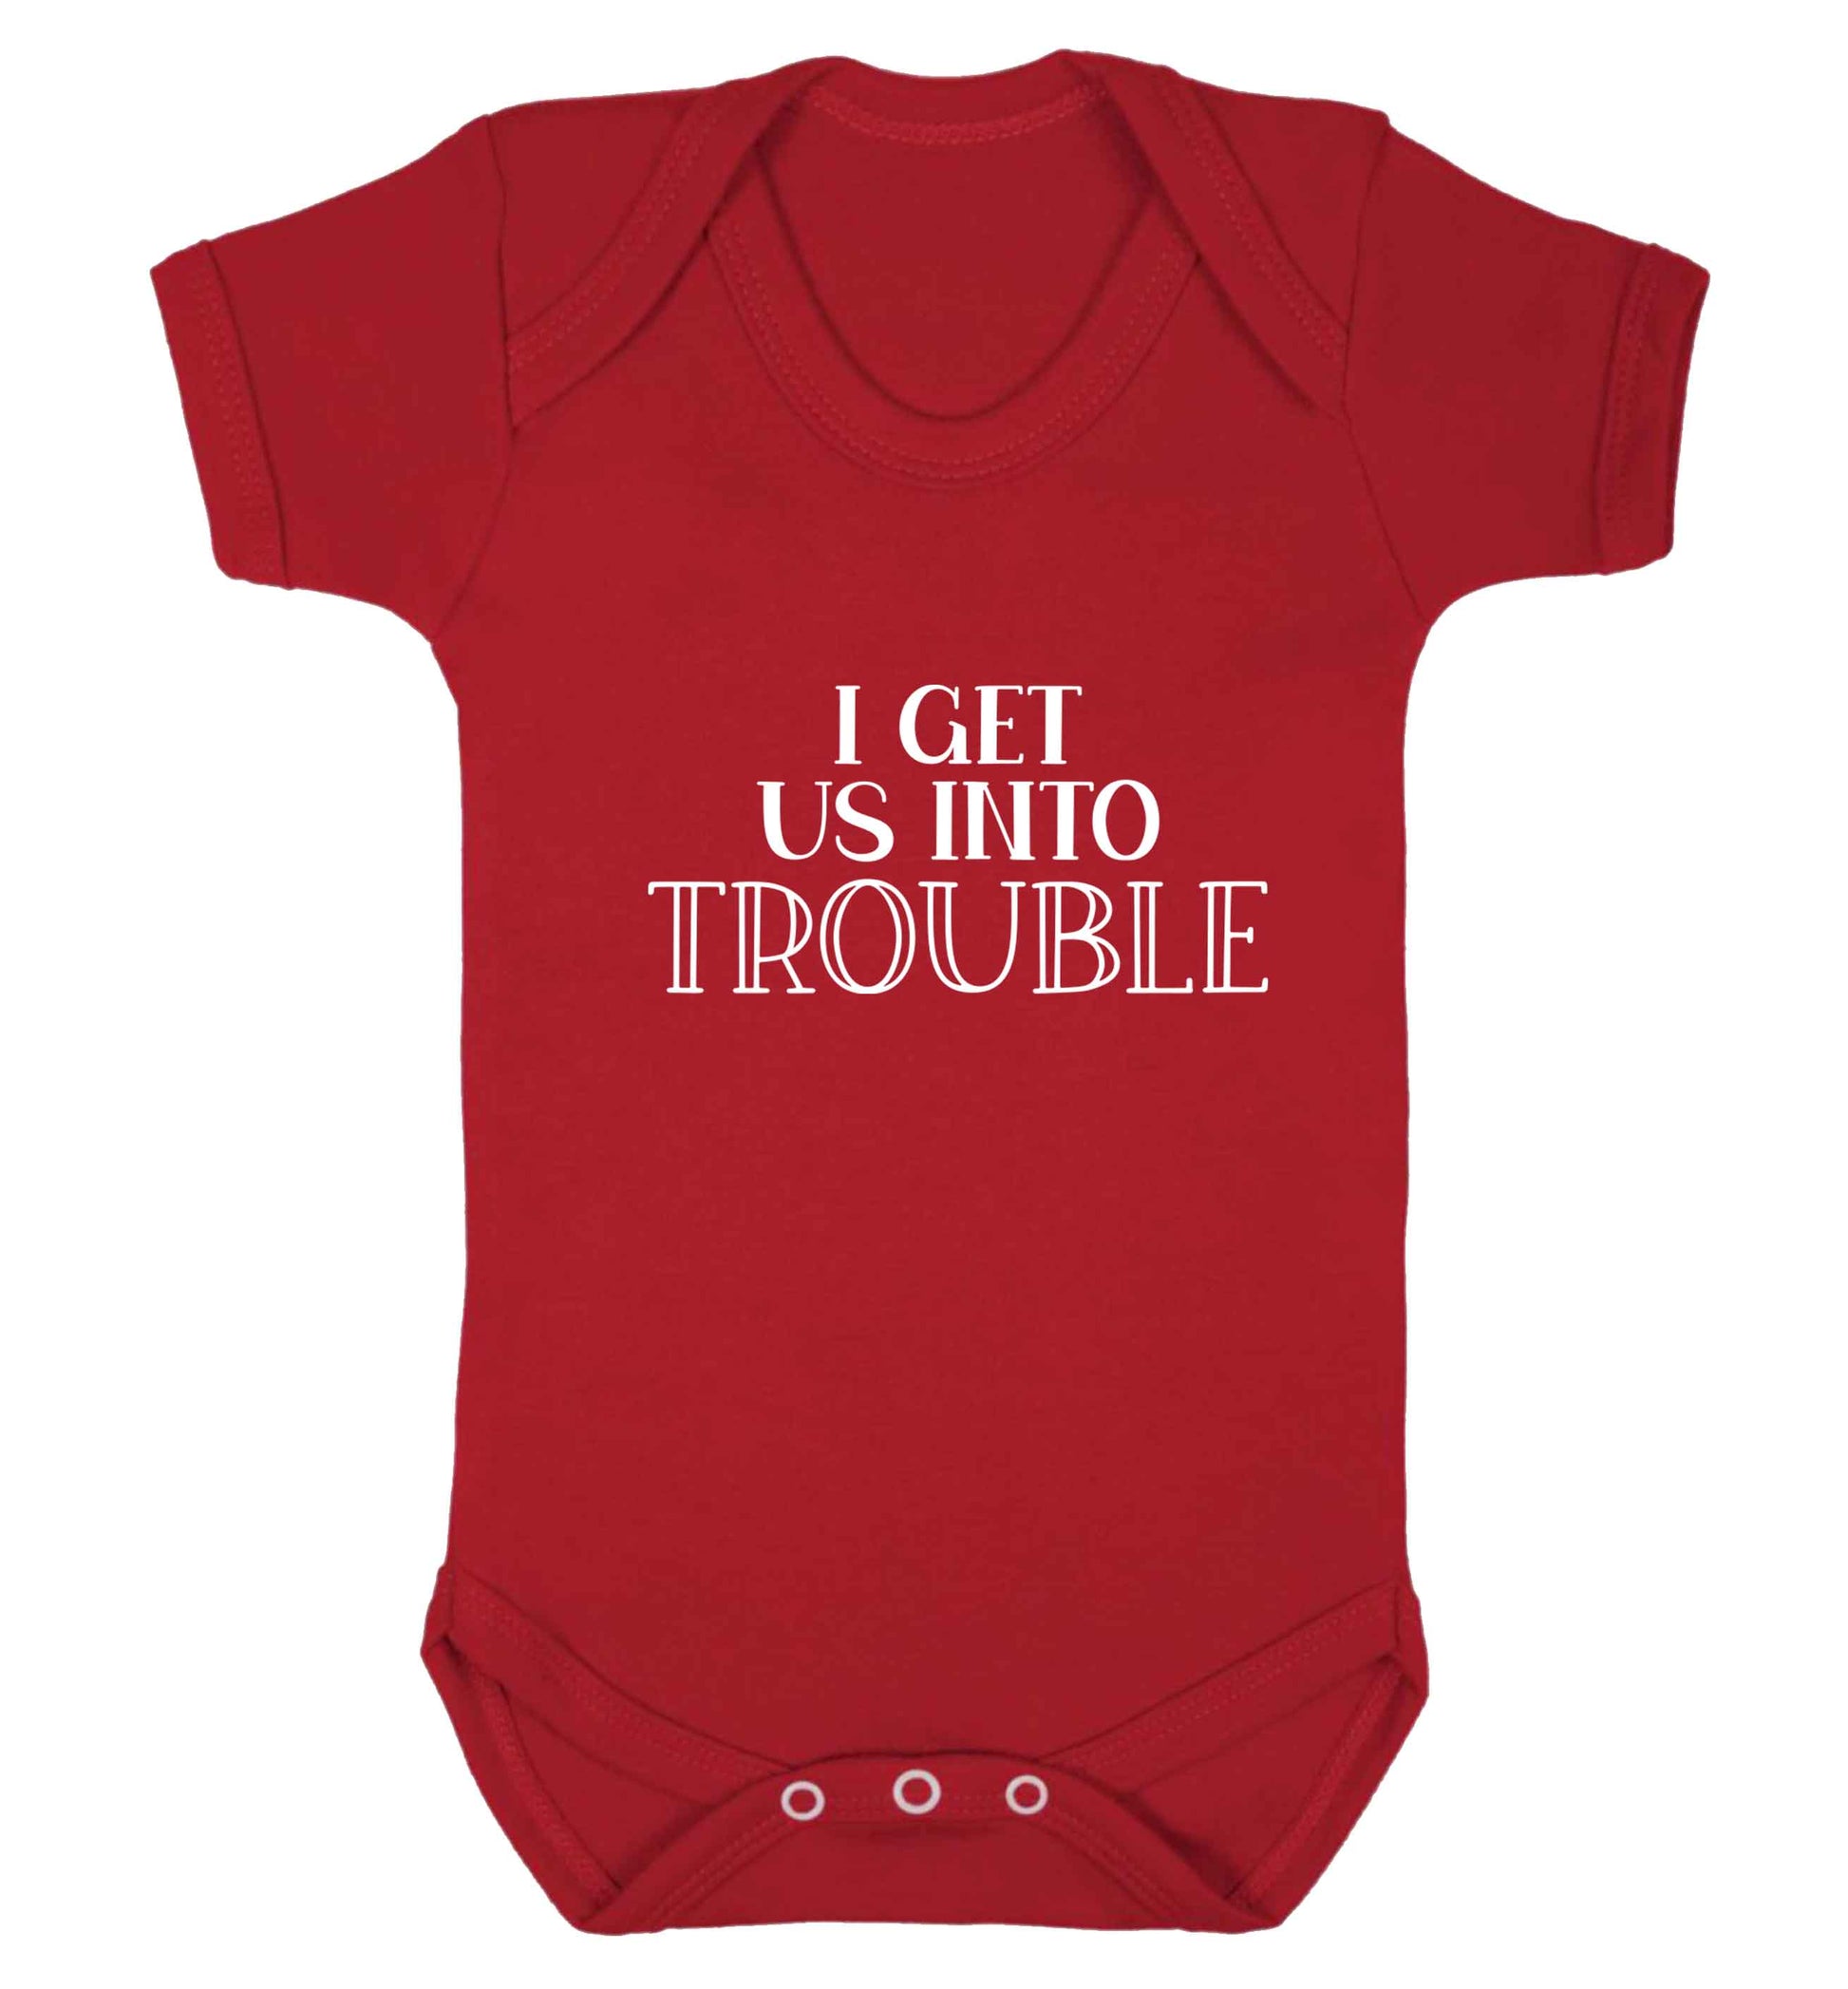 I get us into trouble baby vest red 18-24 months